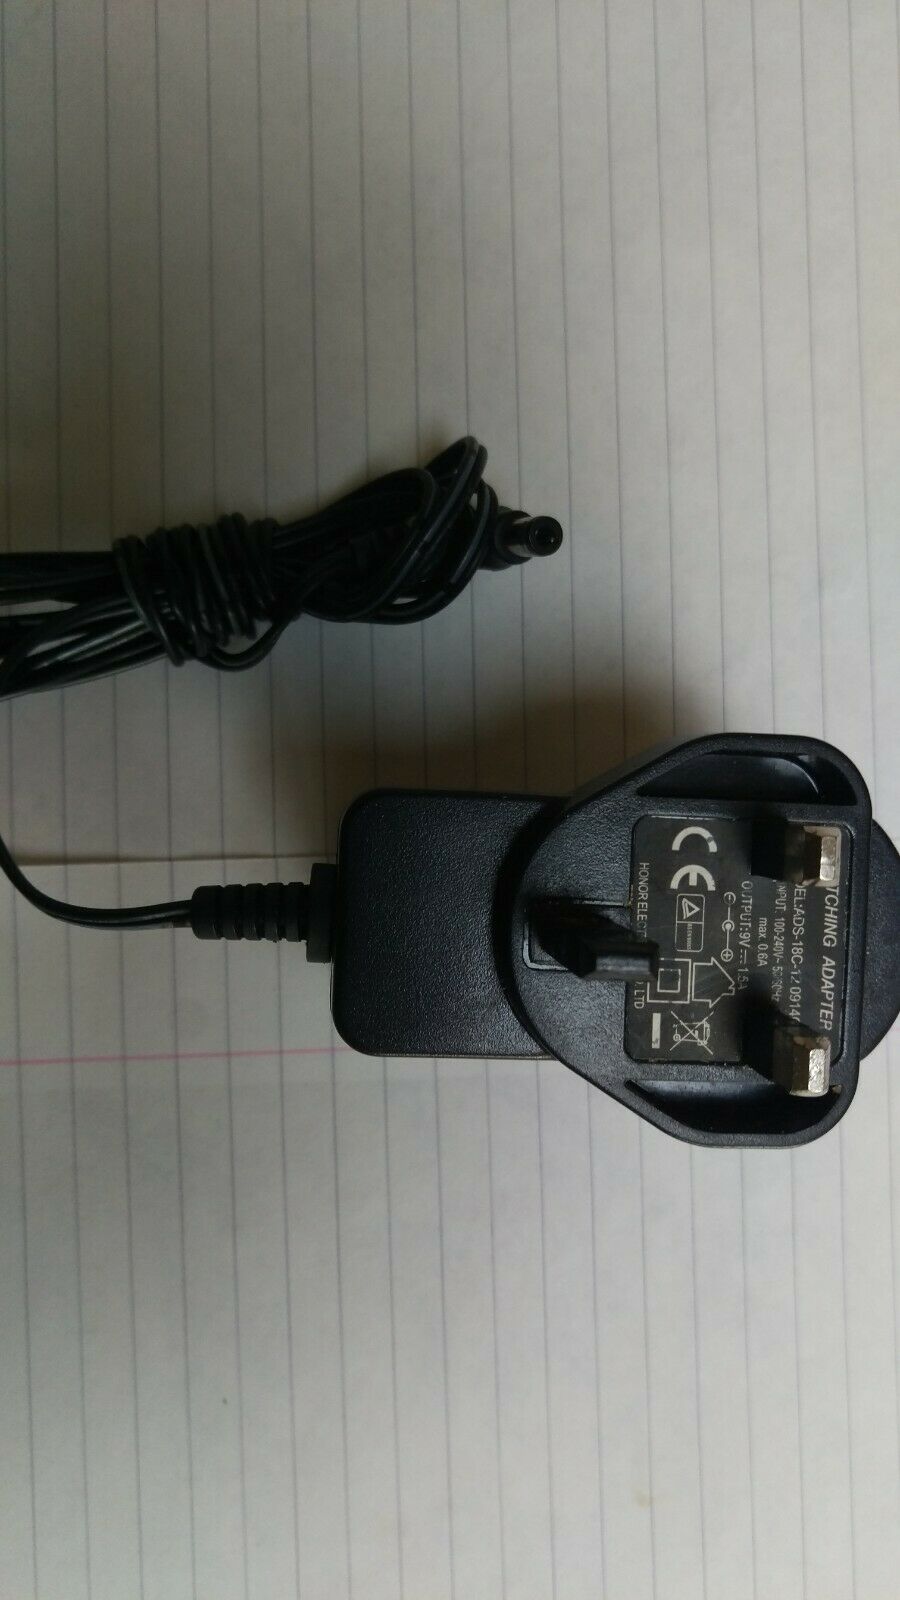 New 9V 1.5A HONOR SWITCHING ads-18c-120914 GPCU AC/DC power adapter